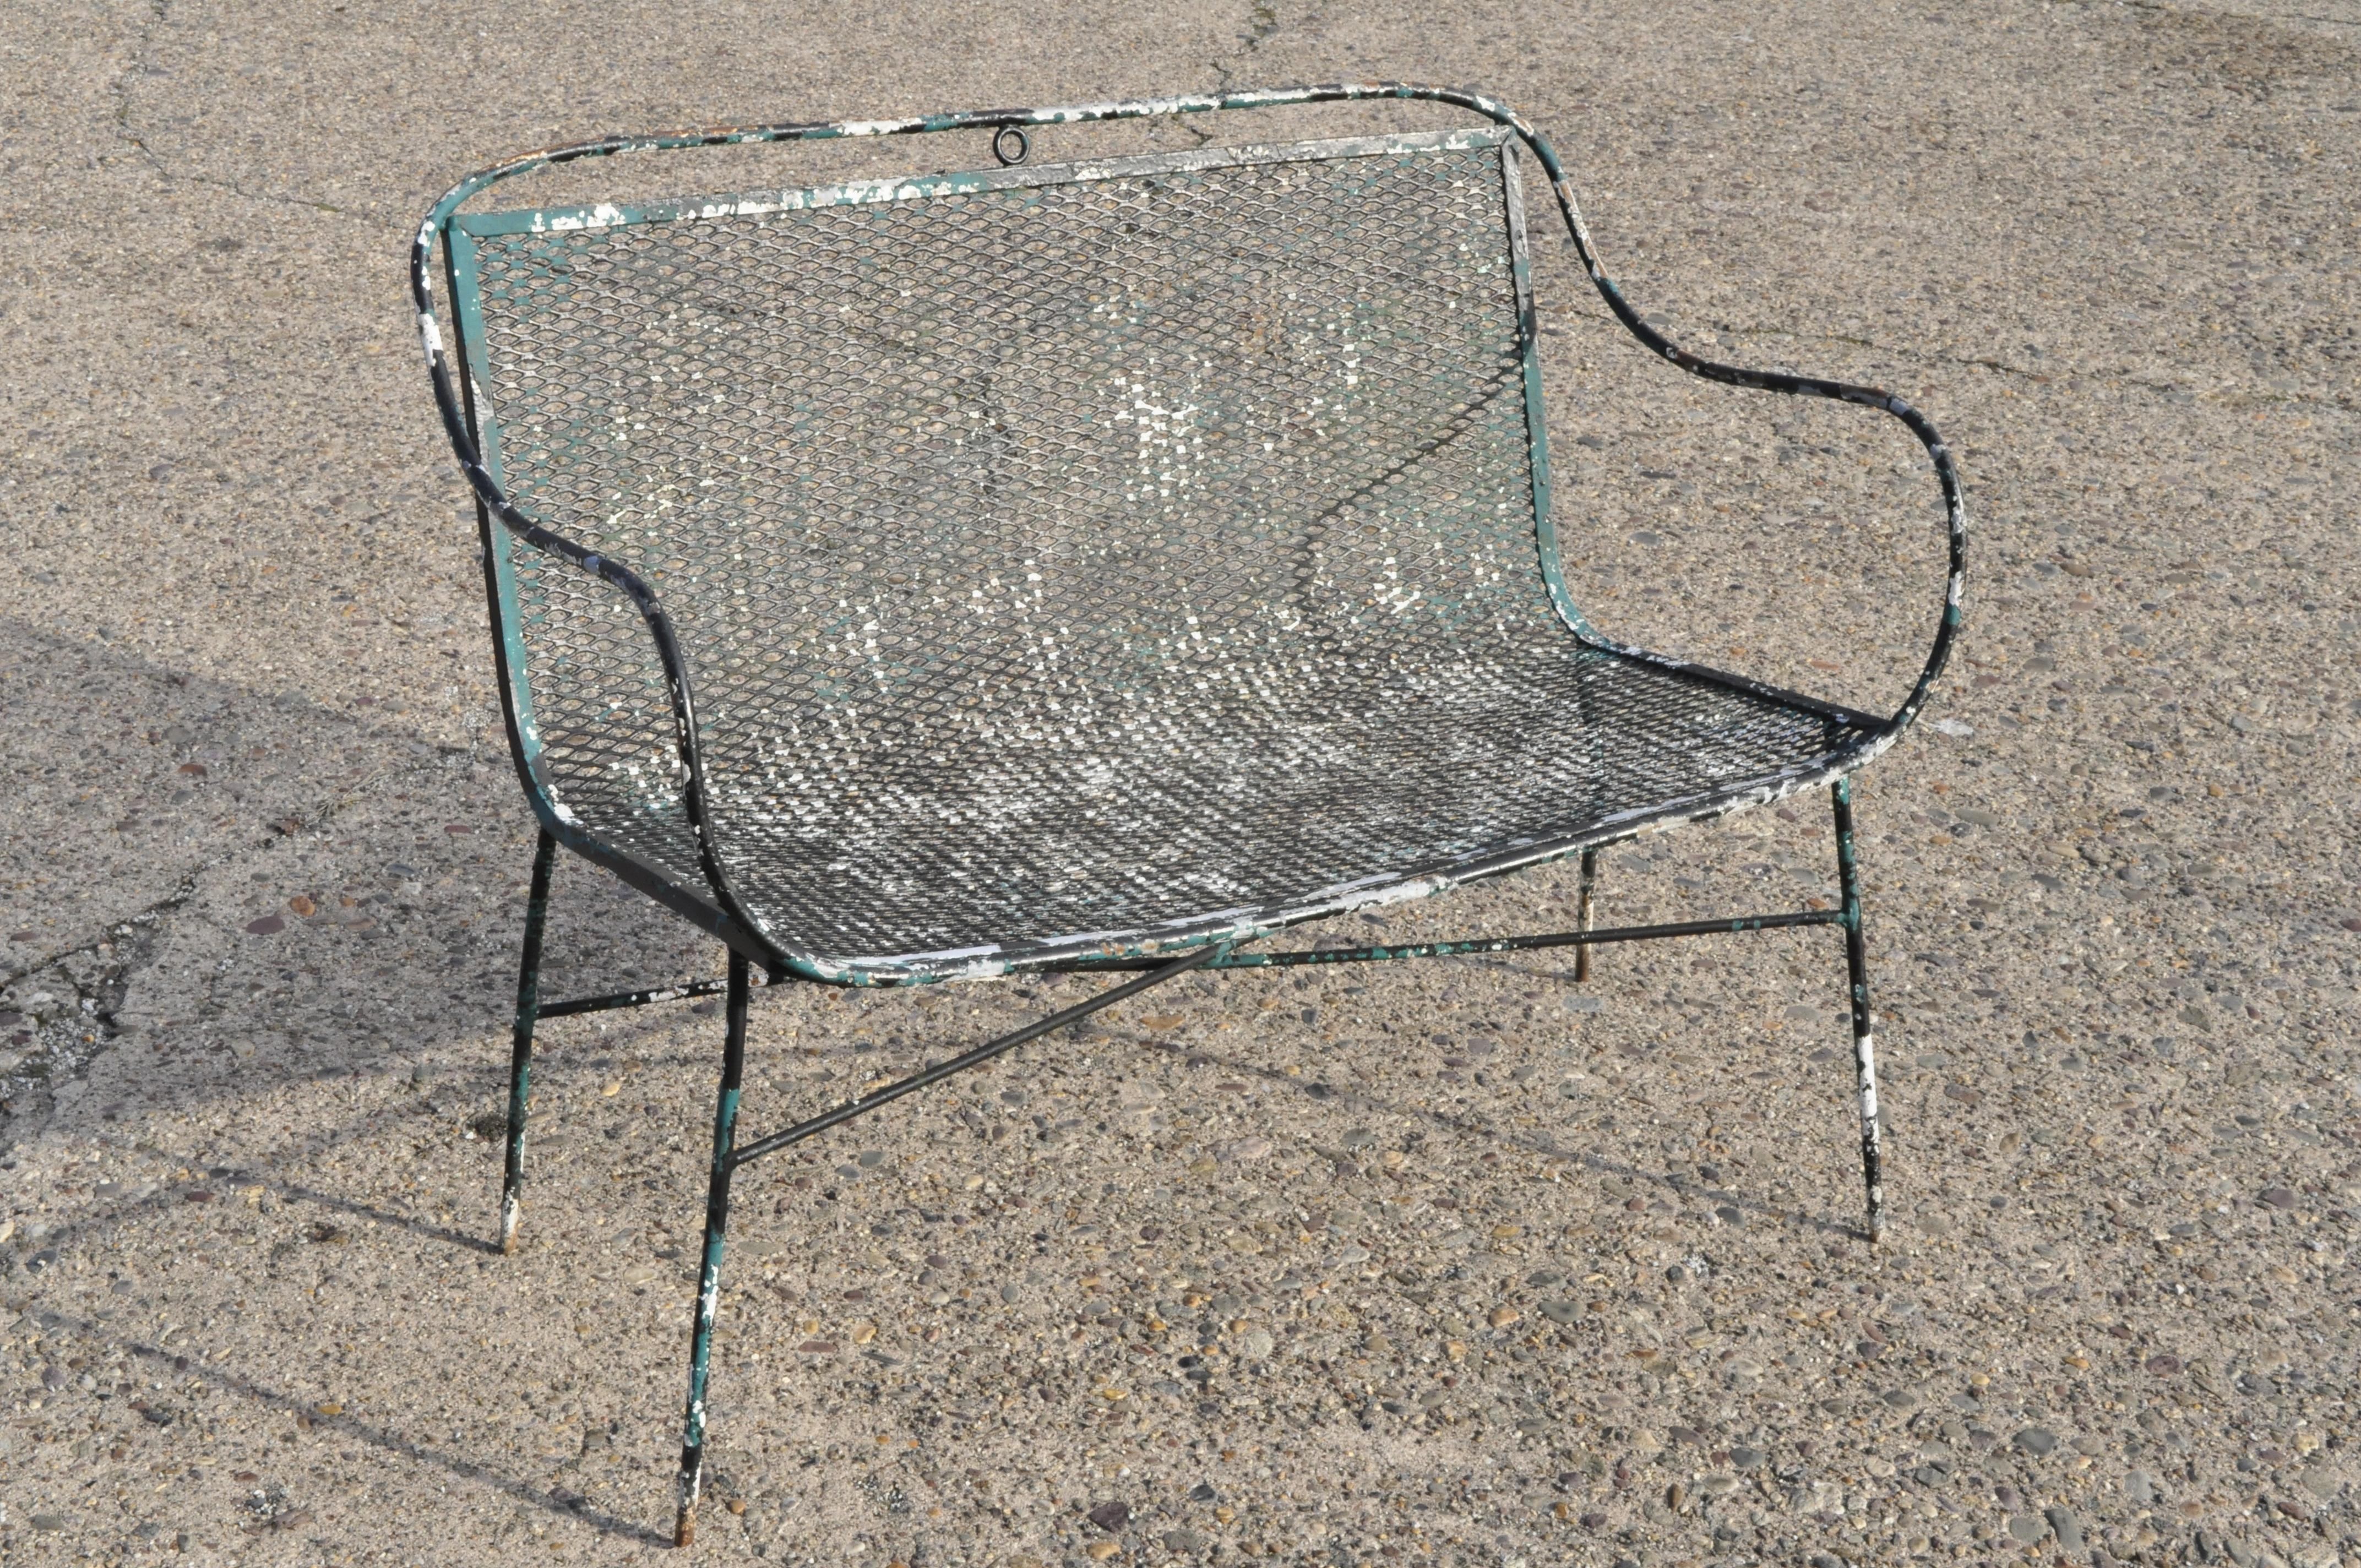 Pair of vintage Salterini style Mid-Century Modern wrought iron settee bench. Item metal mesh seat and back, wrought iron construction, sleek sculptural form, circa mid-20th century. Measurements: 31.5